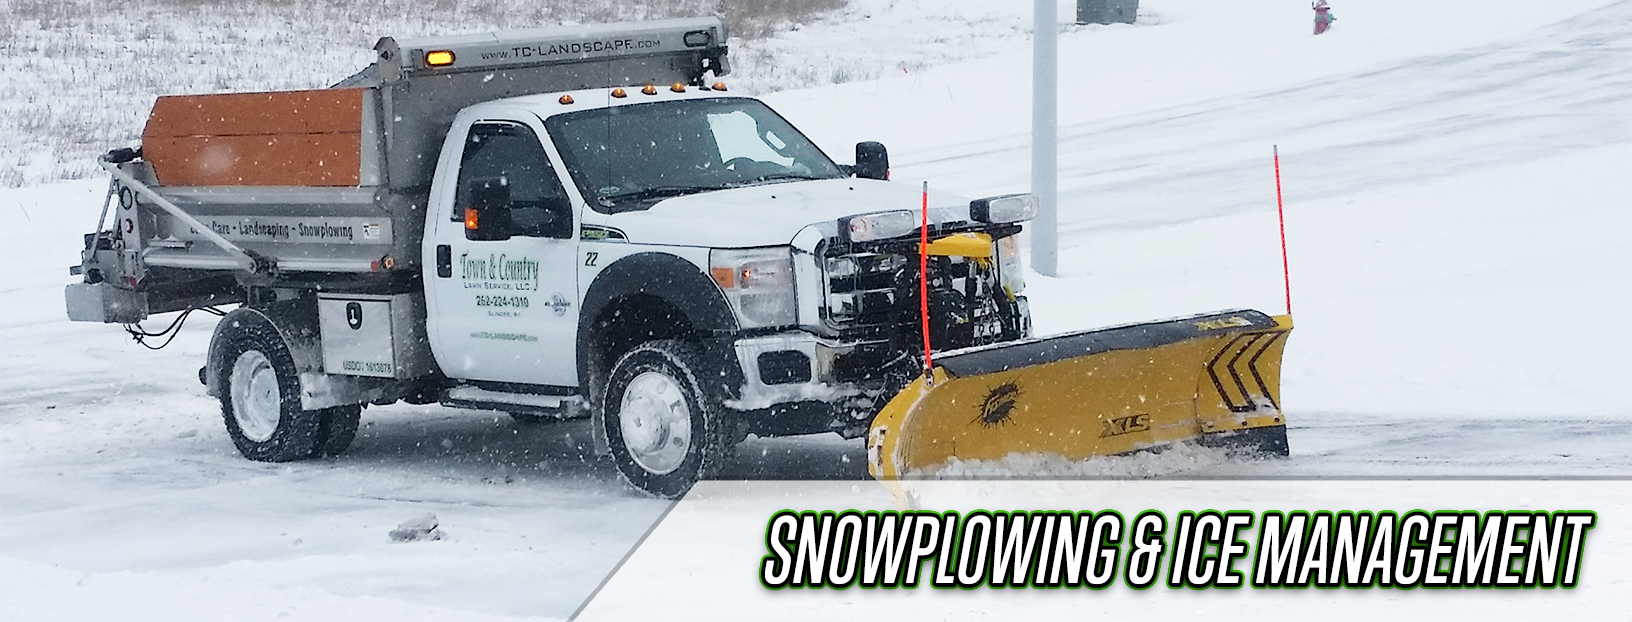 Snowplowing and Ice Management